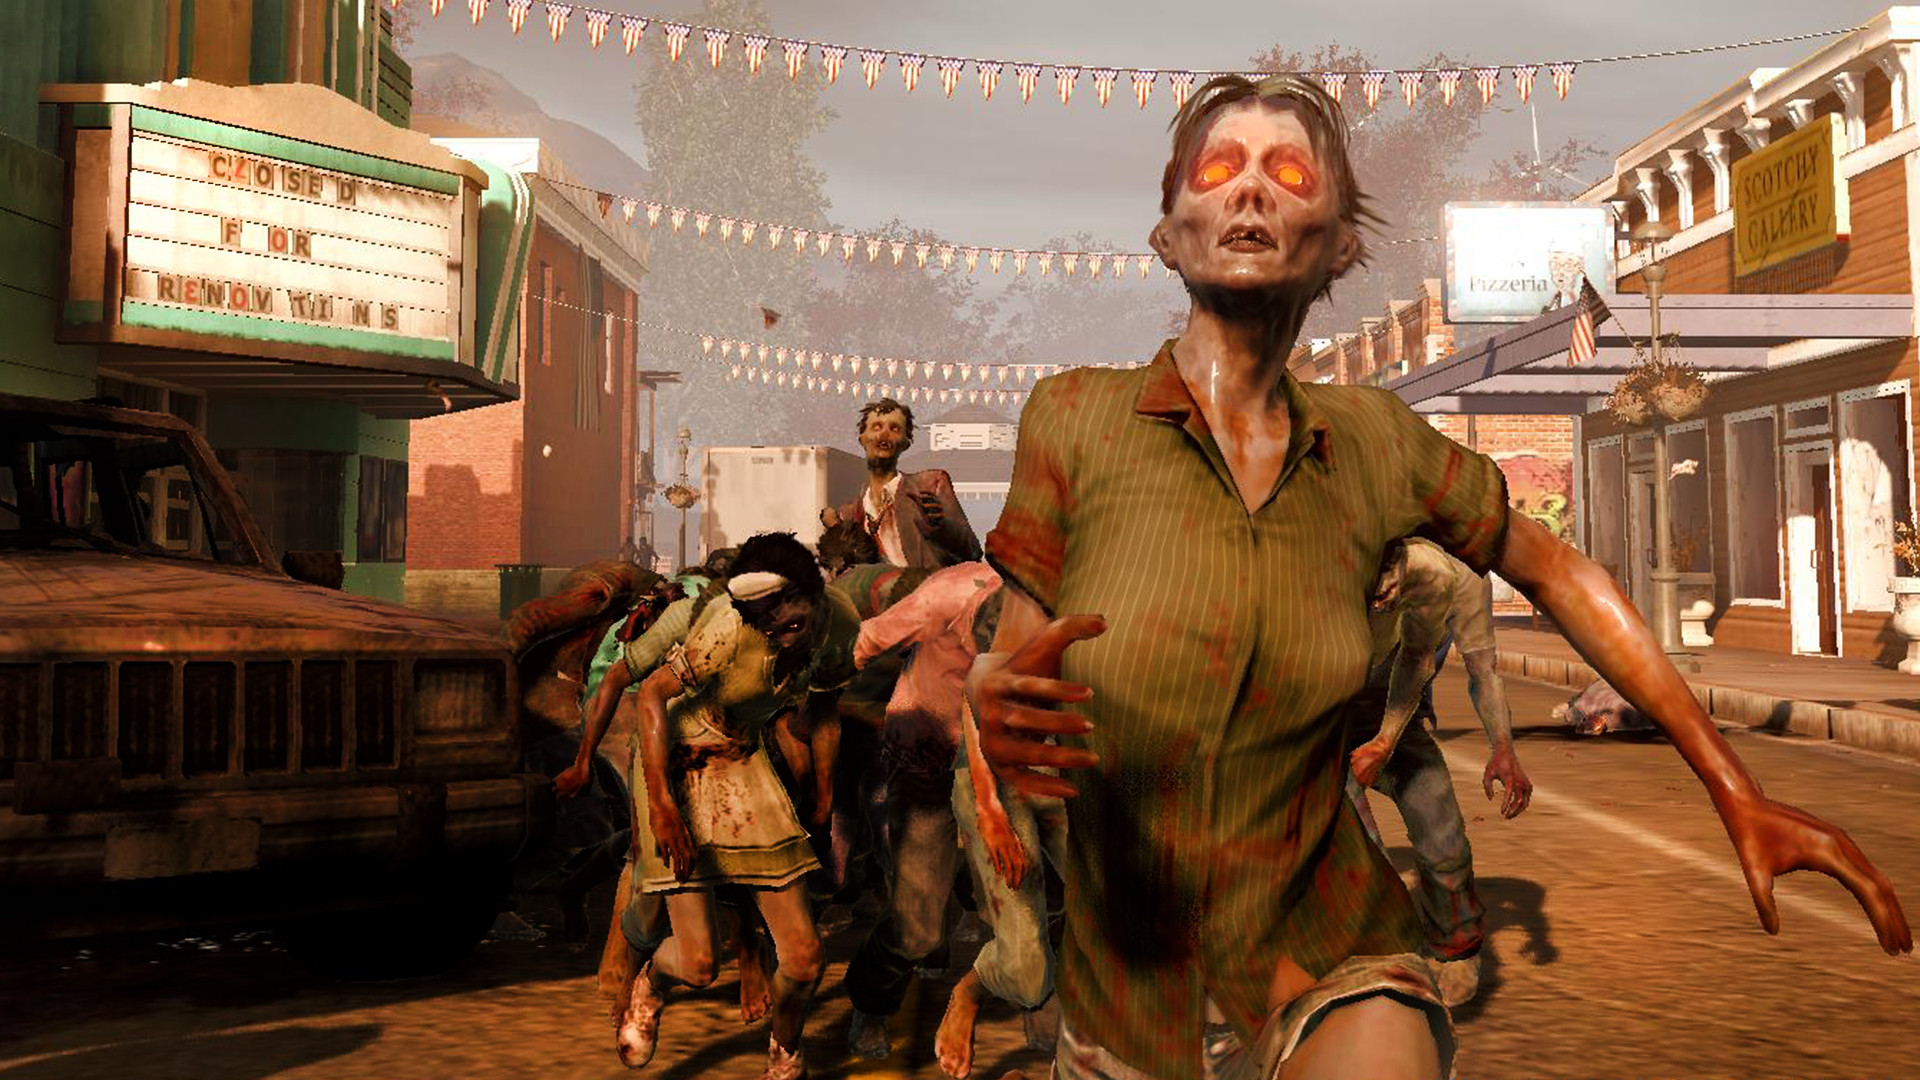 State of Decay: YOSE System Requirements - Can I Run It? - PCGameBenchmark